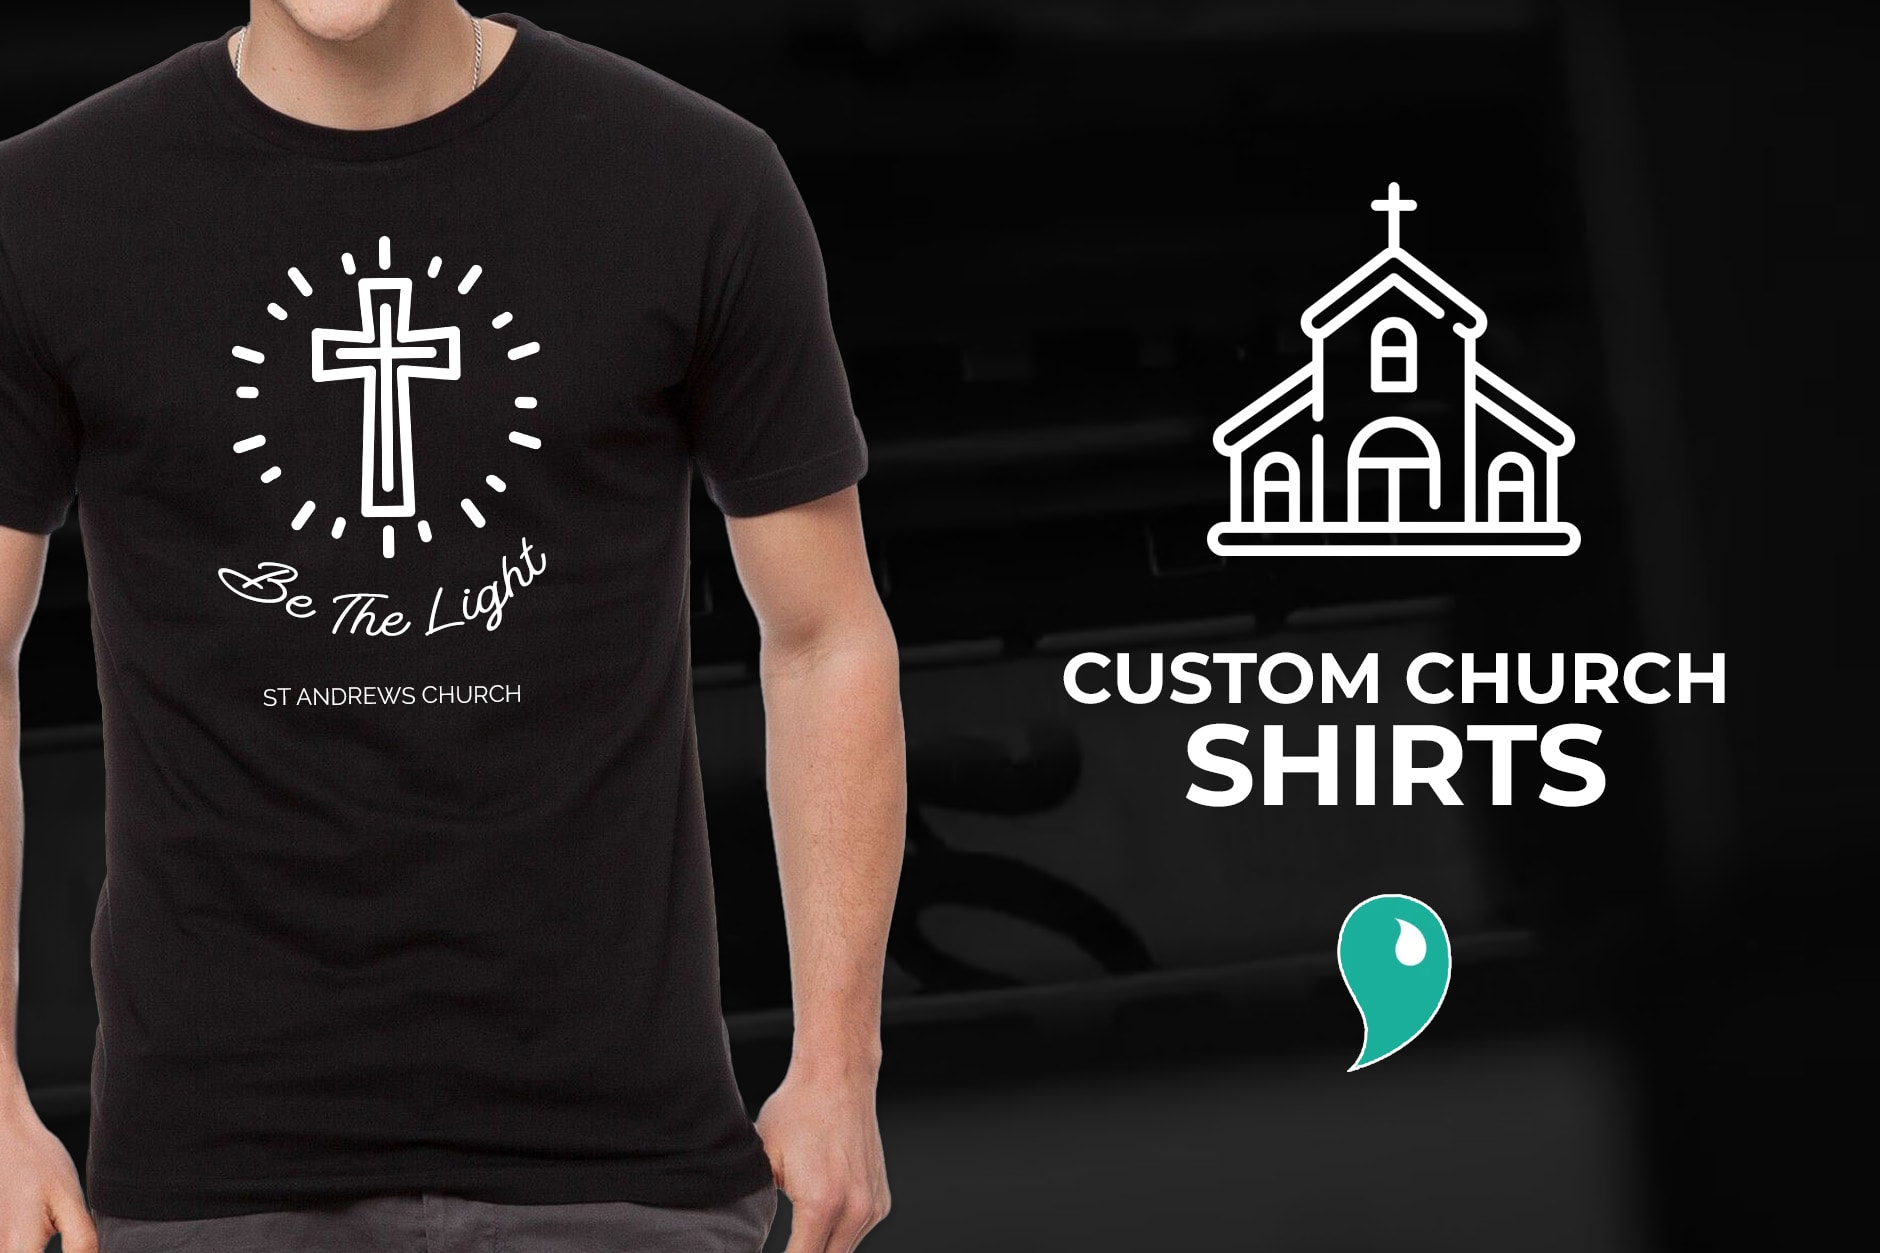 Custom T-shirts - Design T-shirts, Apparel & Promo Products Online